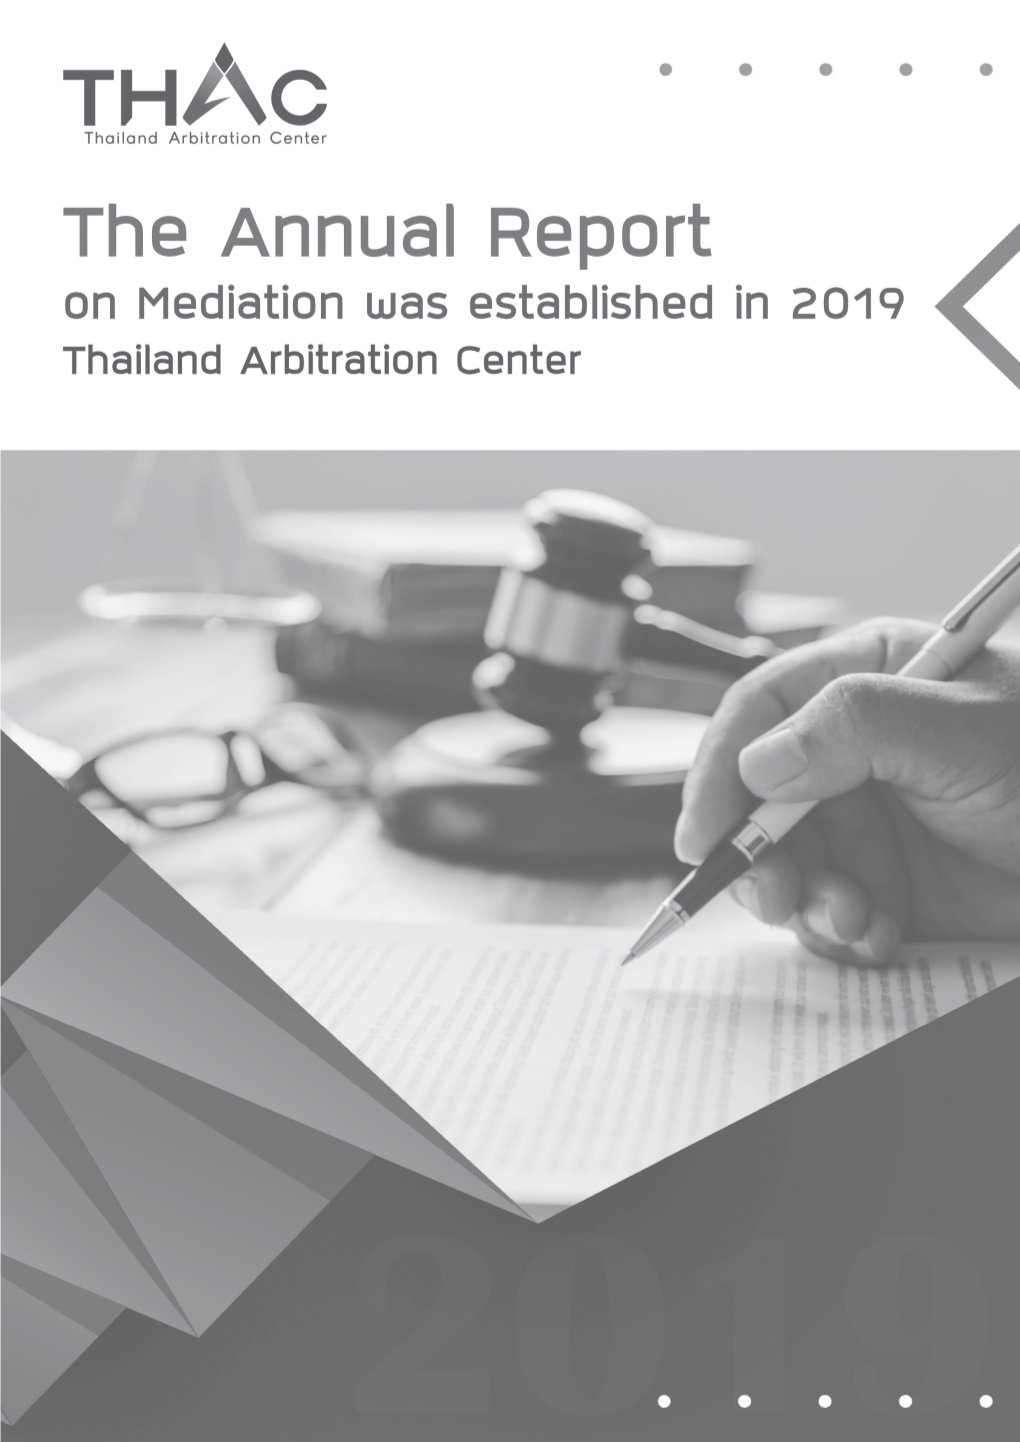 Report on Mediation and Conciliation Results (Civil Cases, Consumer Cases, and Criminal Cases of All Courts) from January - December 2019 Office of the Judiciary